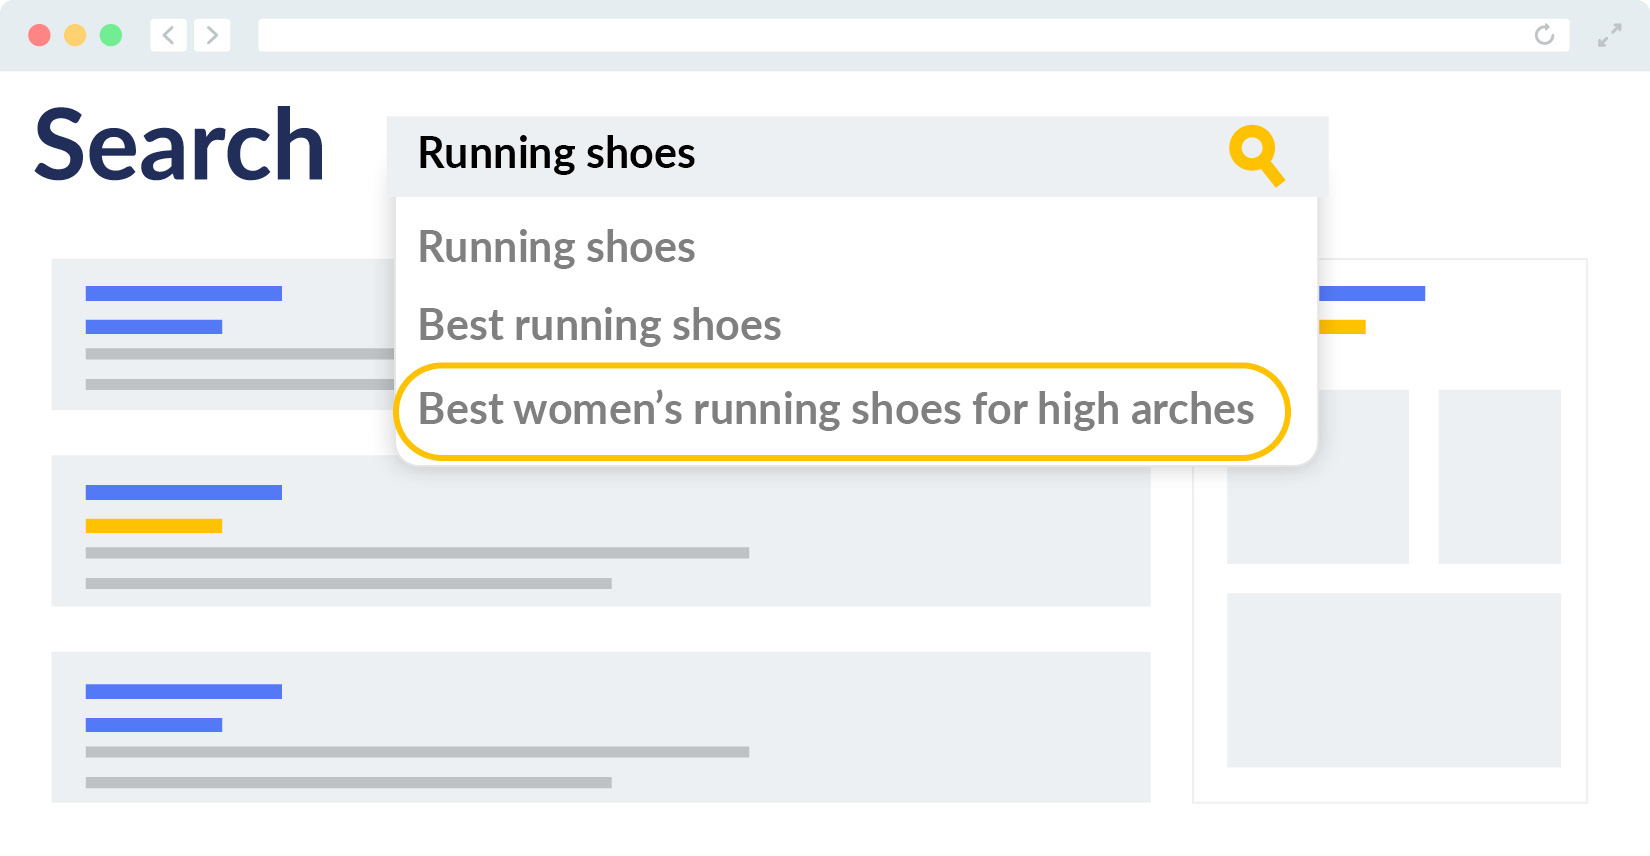 This graphic shows a searcher’s perspective when choosing the right keywords to find running shoes by searching on Google.